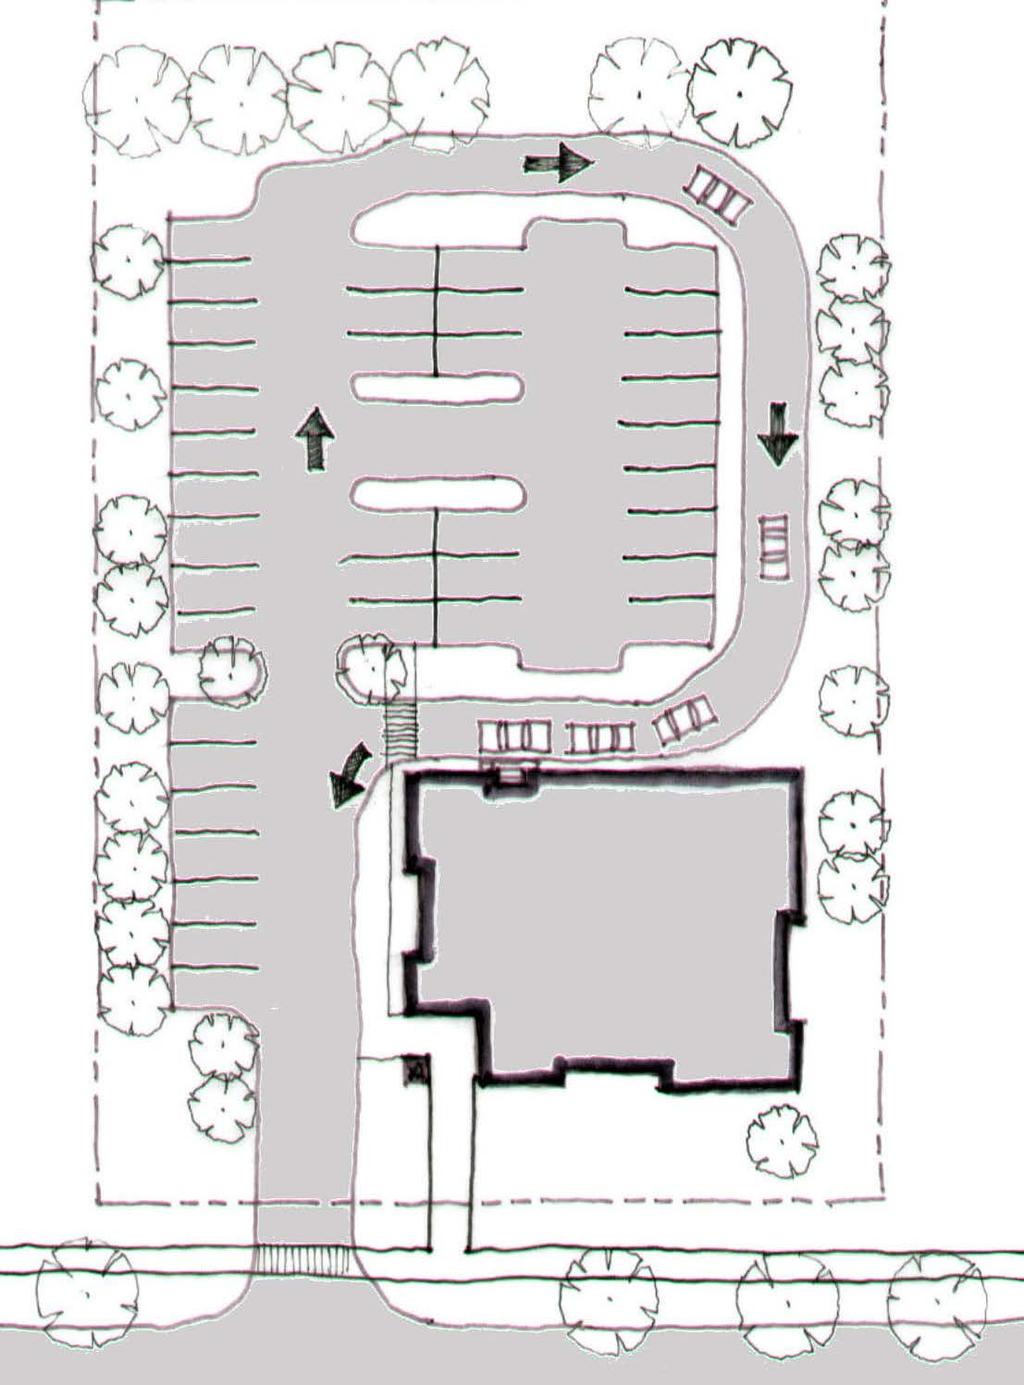 A B C E F D B3 : Access to the site Access driveways to Vehicle Drive-through Facilities should be located as far away as possible from street intersections and corners and designed in accordance